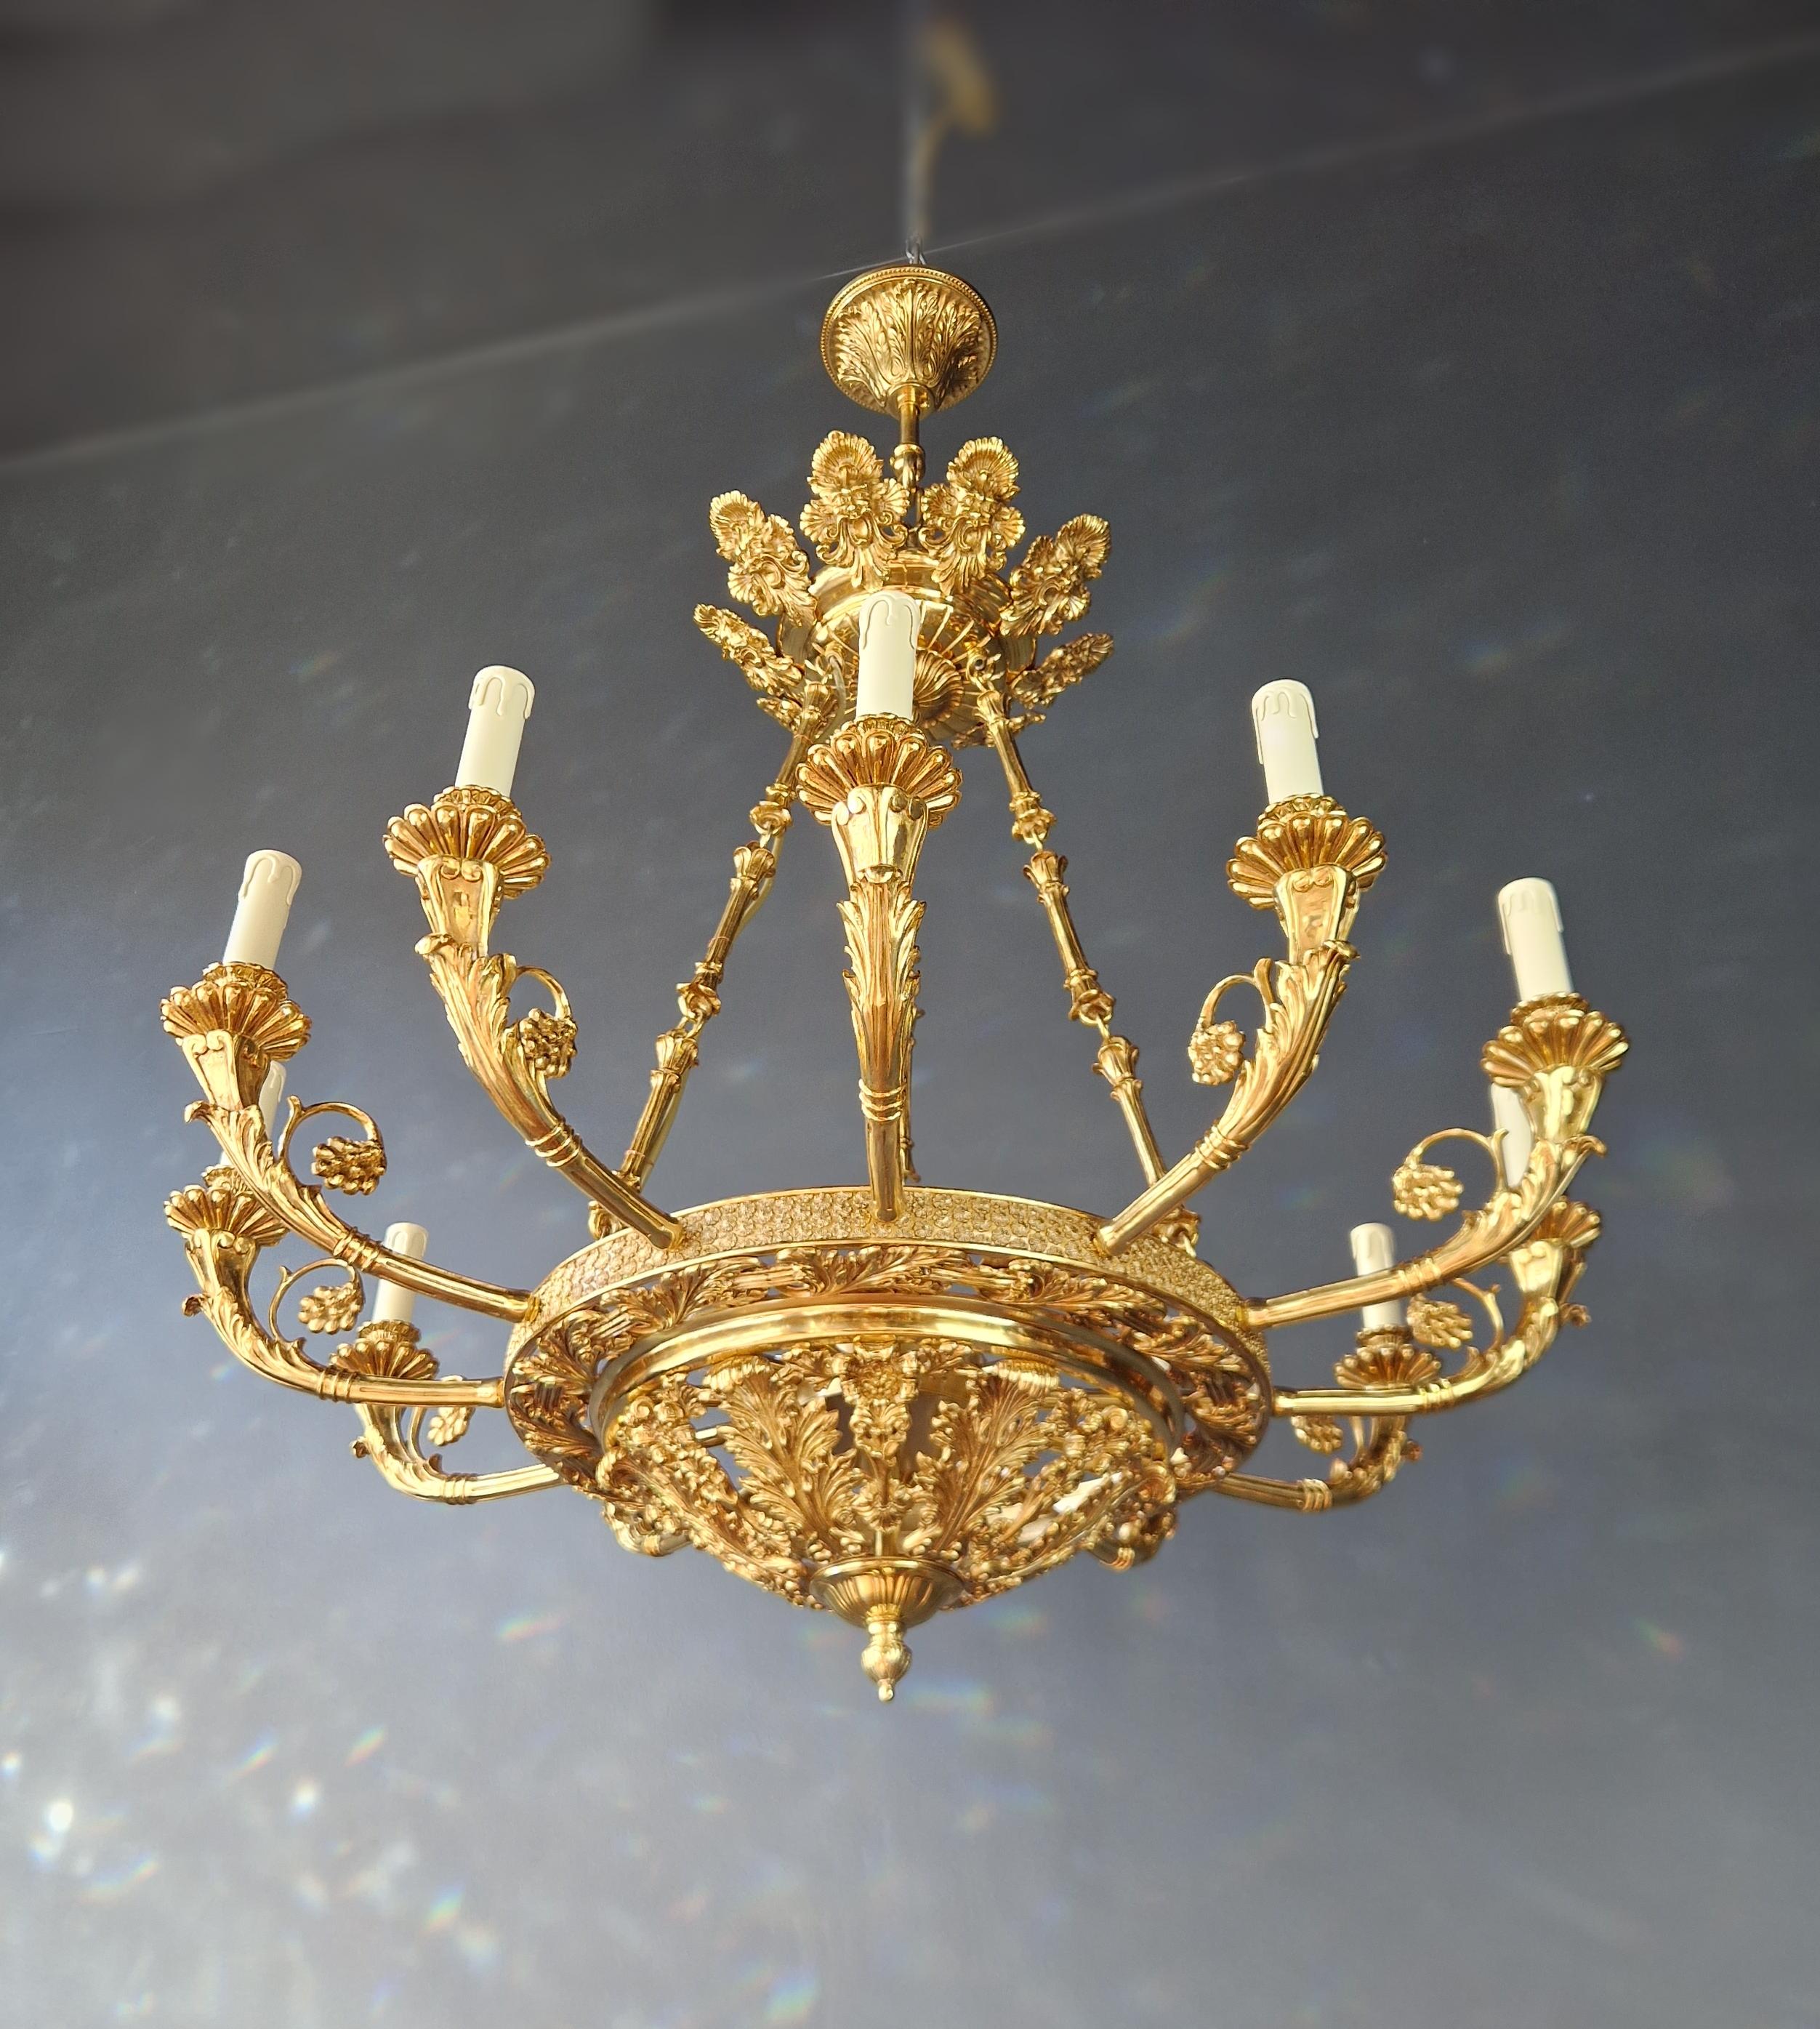 Baroque Brass Empire Chandelier Crystal Lustre Lamp Antique Gold In New Condition For Sale In Berlin, DE